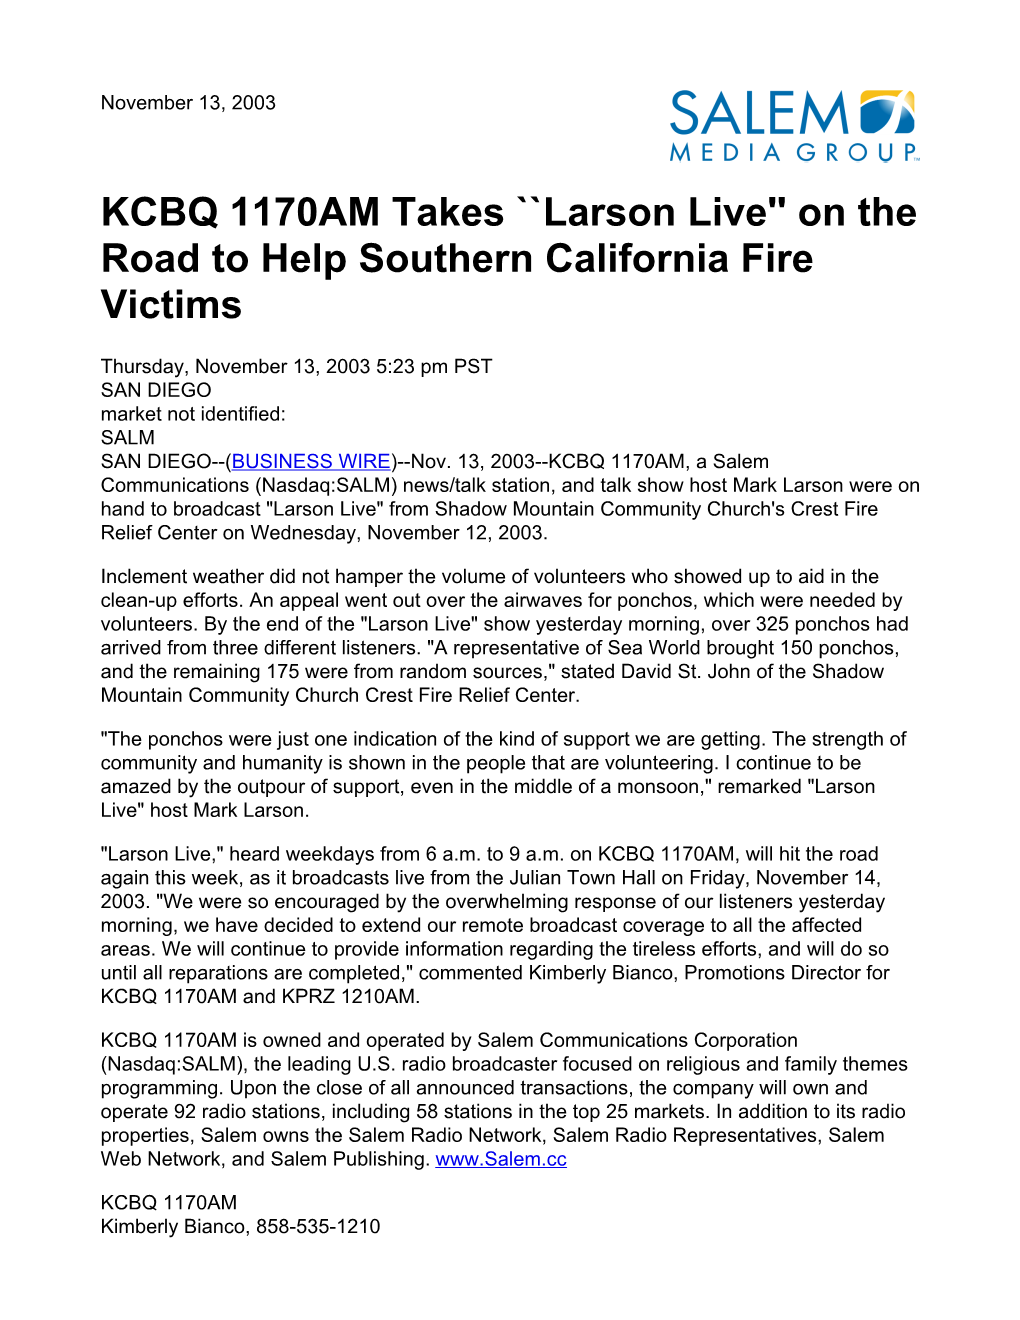 KCBQ 1170AM Takes ``Larson Live'' on the Road to Help Southern California Fire Victims